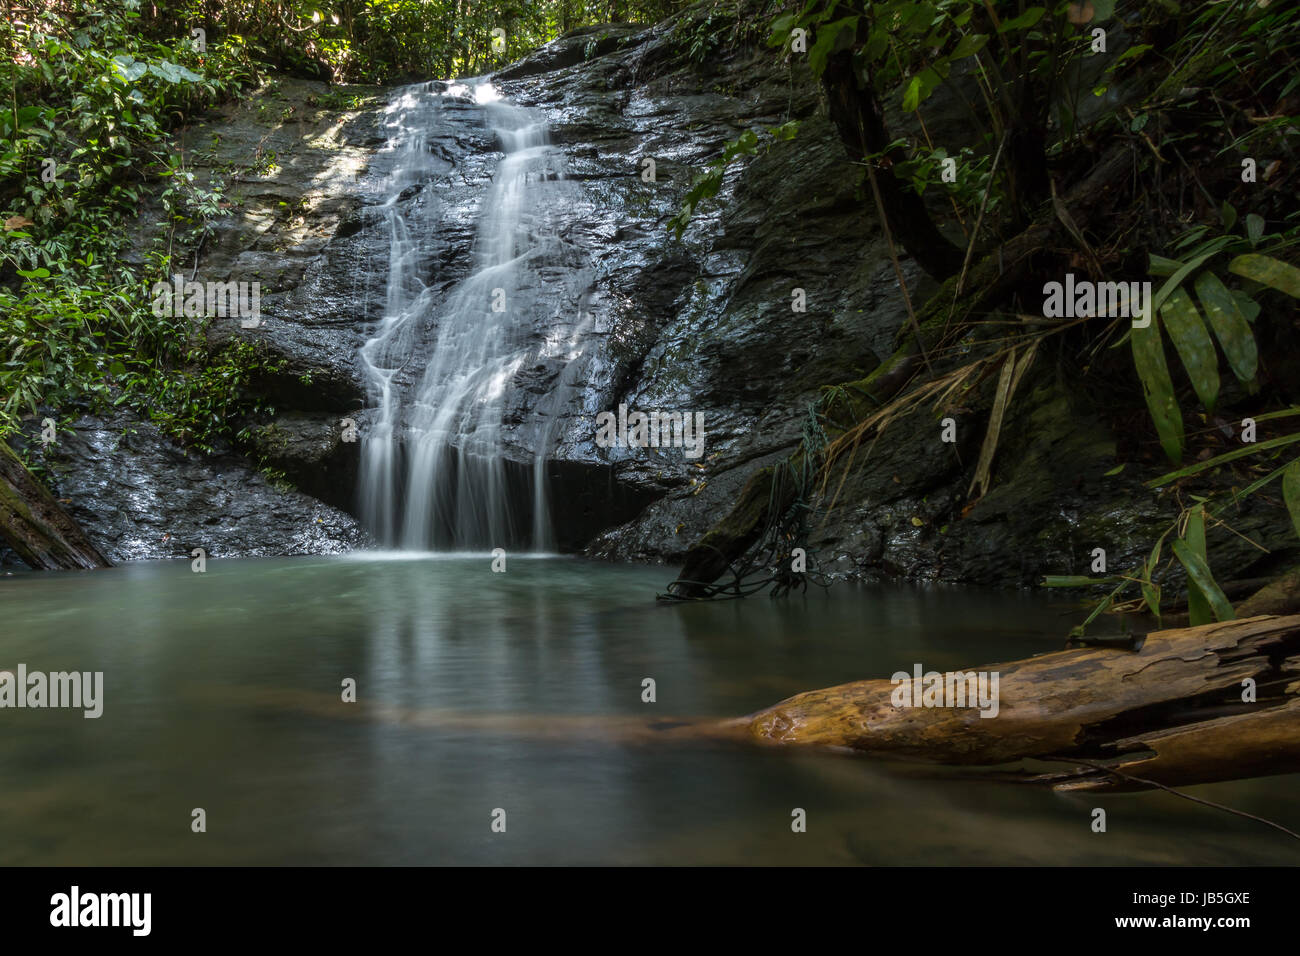 A small waterfall in a secluded part of the jungle in Ulu Temburong National Park in Brunei Stock Photo